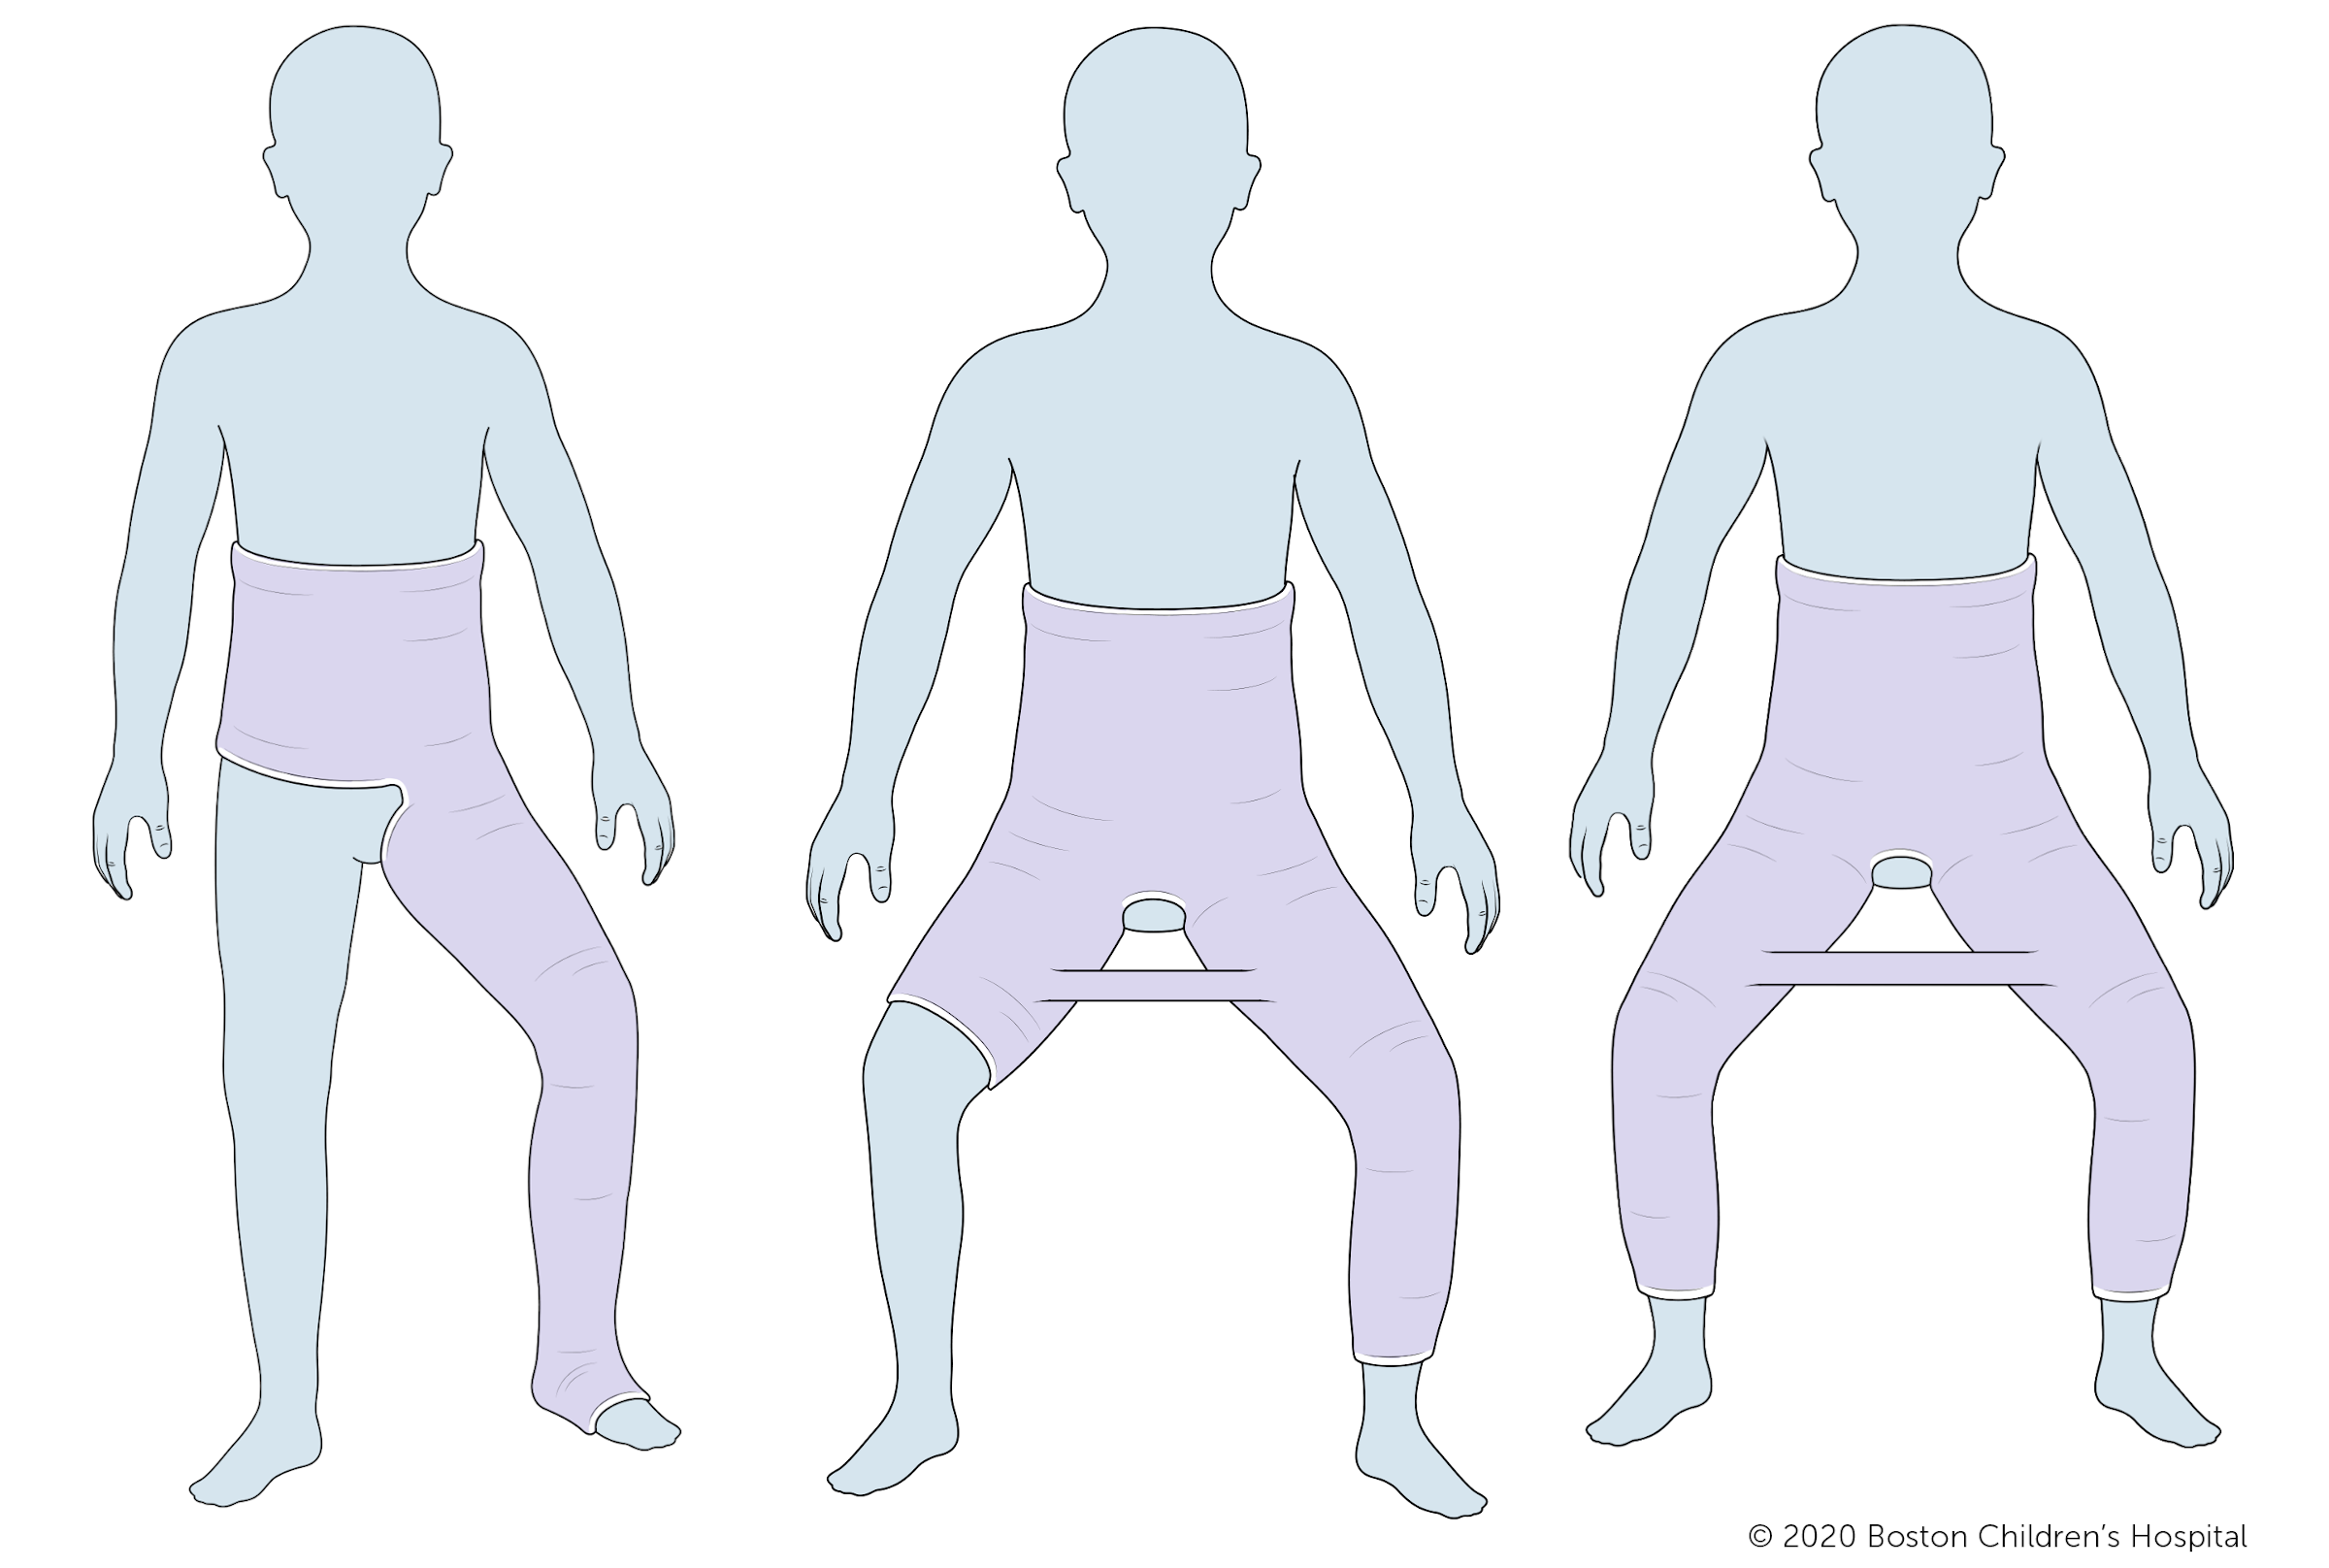 Three types of casts, from left: a unilateral hip spica cast, a one and one-half hip spica cast, and a bilateral long leg hip spica cast.